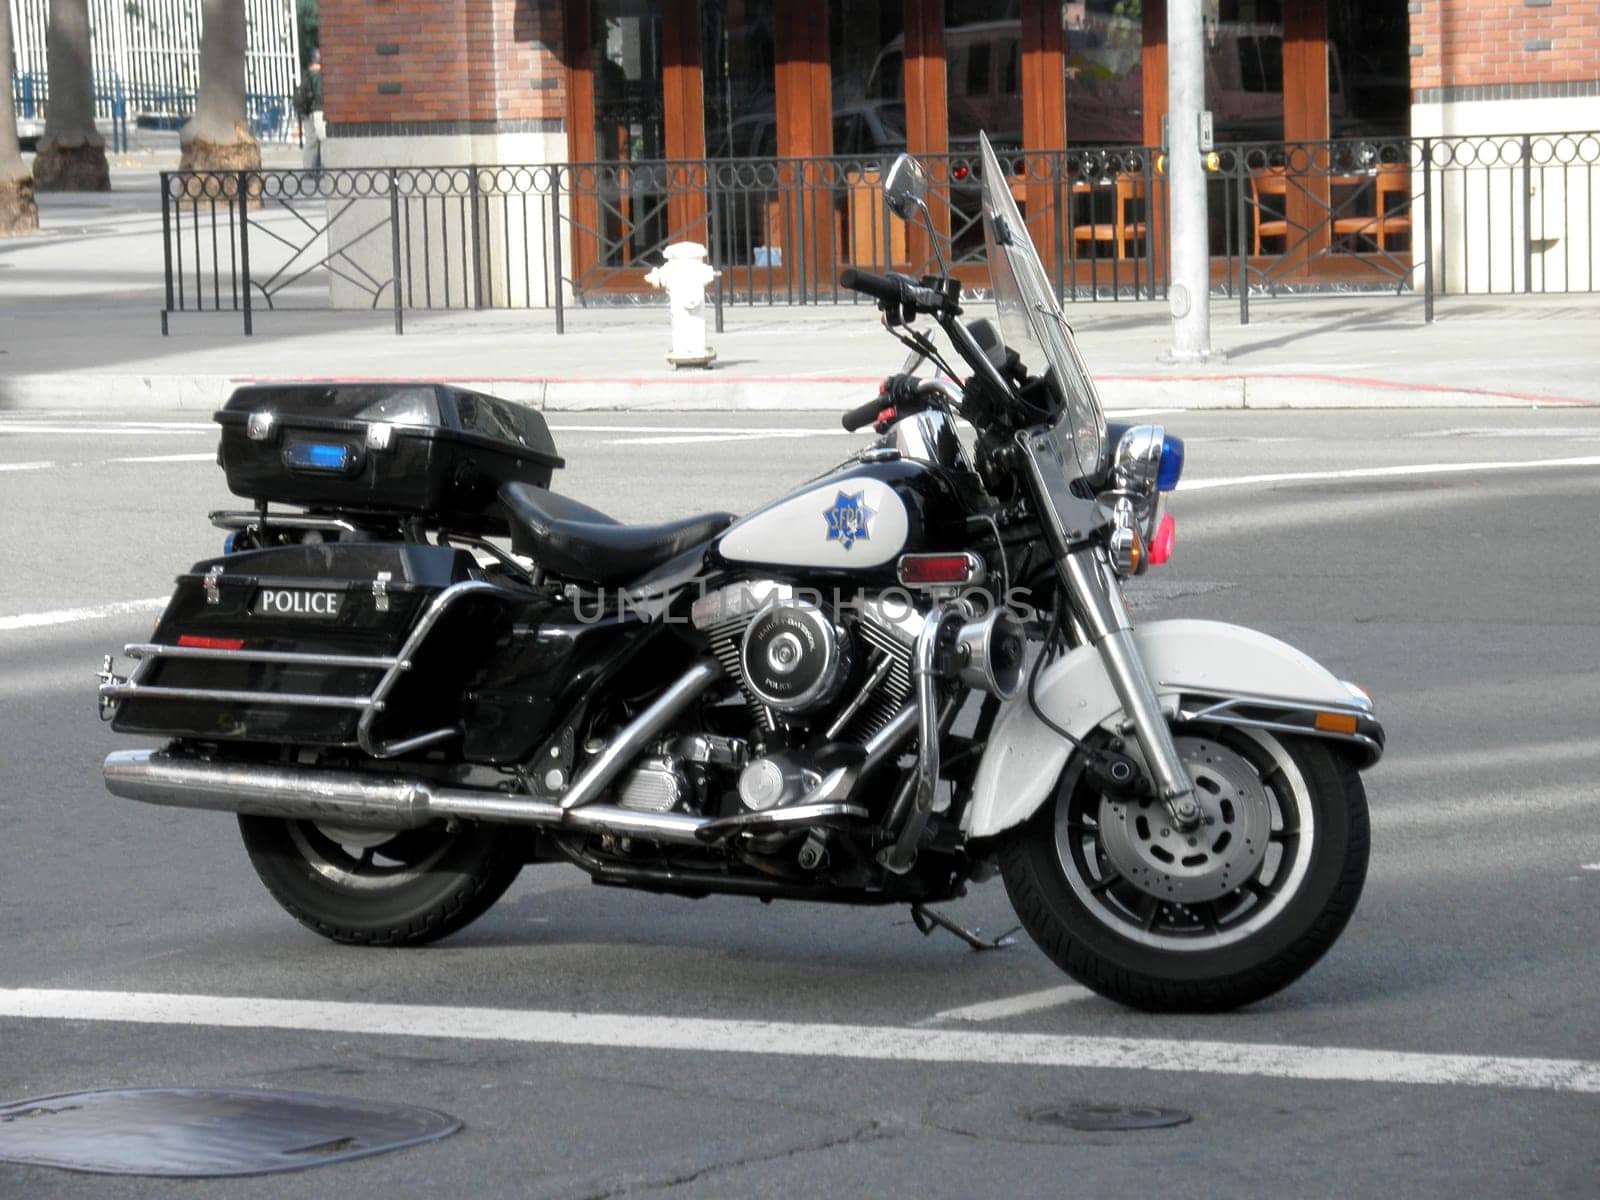 San Francisco - November 9, 2009:  San Francisco Police Department motorcycle parked on a city street. The motorcycle is black and white with a blue and white emblem on the side. The photo shows the details and features of the motorcycle, such as the windshield, the light, and the handle. The photo is taken from a close-up angle, focusing on the motorcycle.